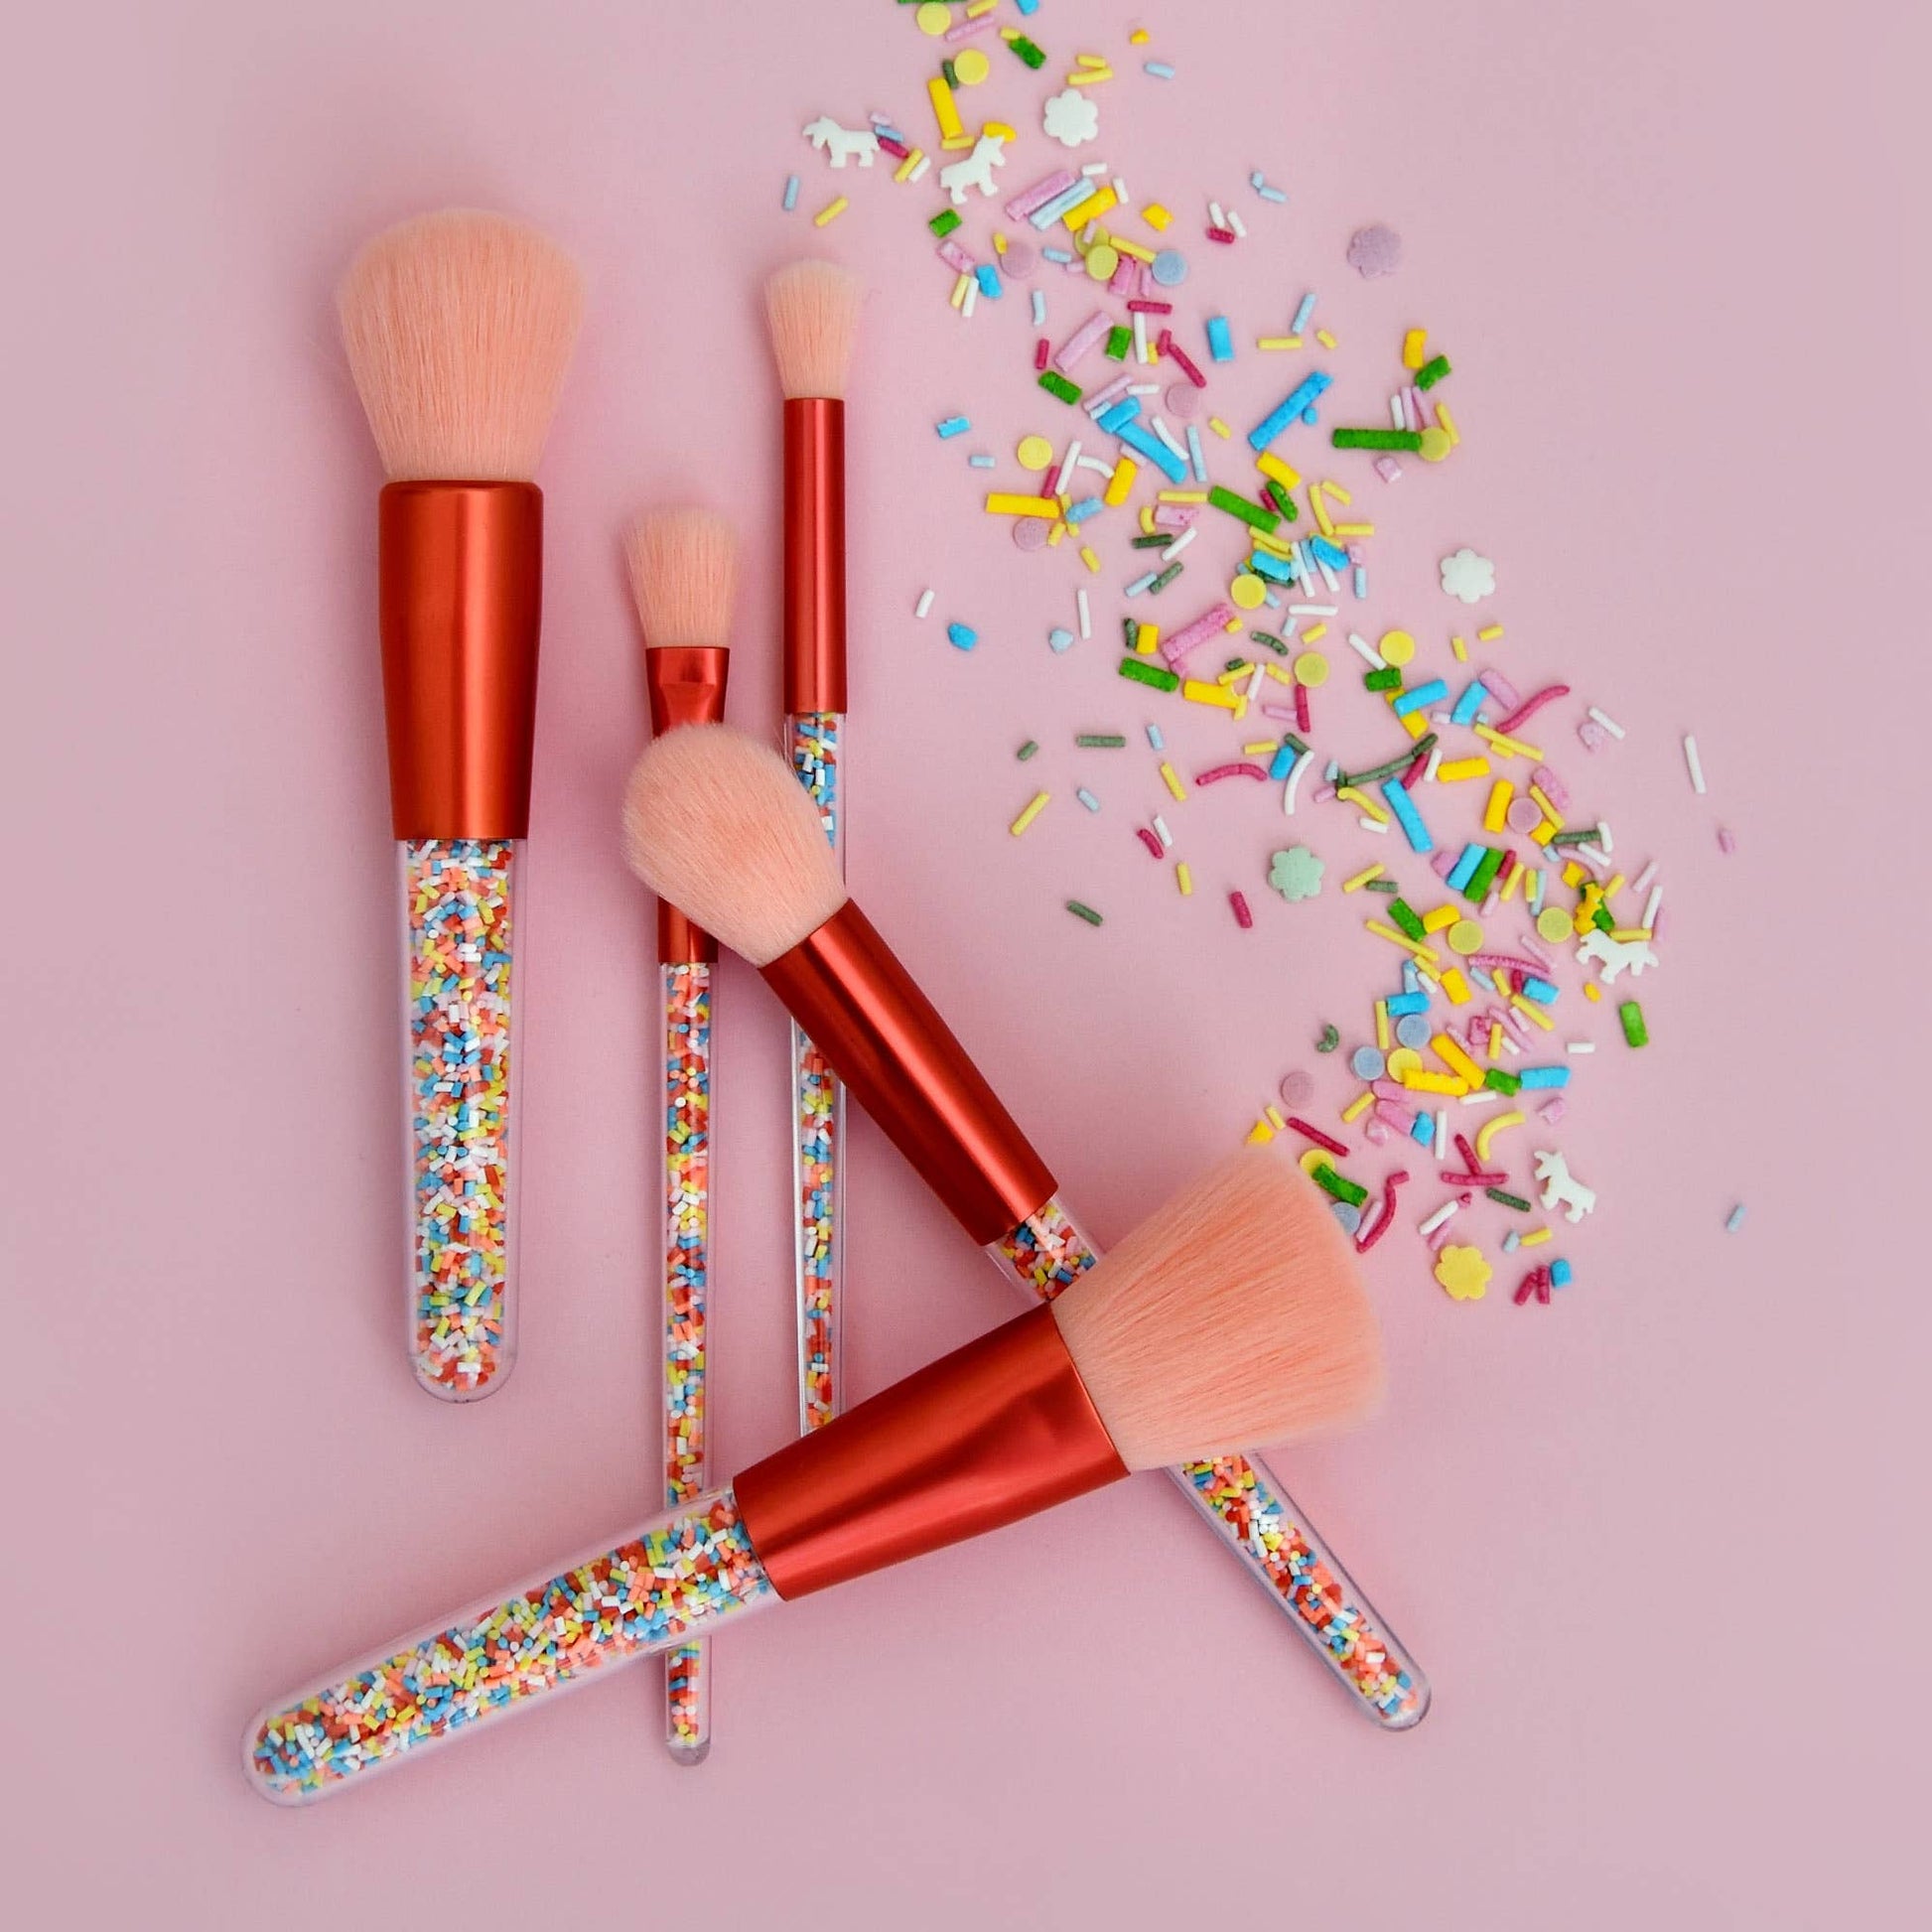 🌈 The twinkle sprinkle brush set includes 5 soft, hypoallergenic, vegan, and cruelty-free brushes. Sprinkle-filled handles make them bright, happy, and easy to spot under a pile of discarded toys.